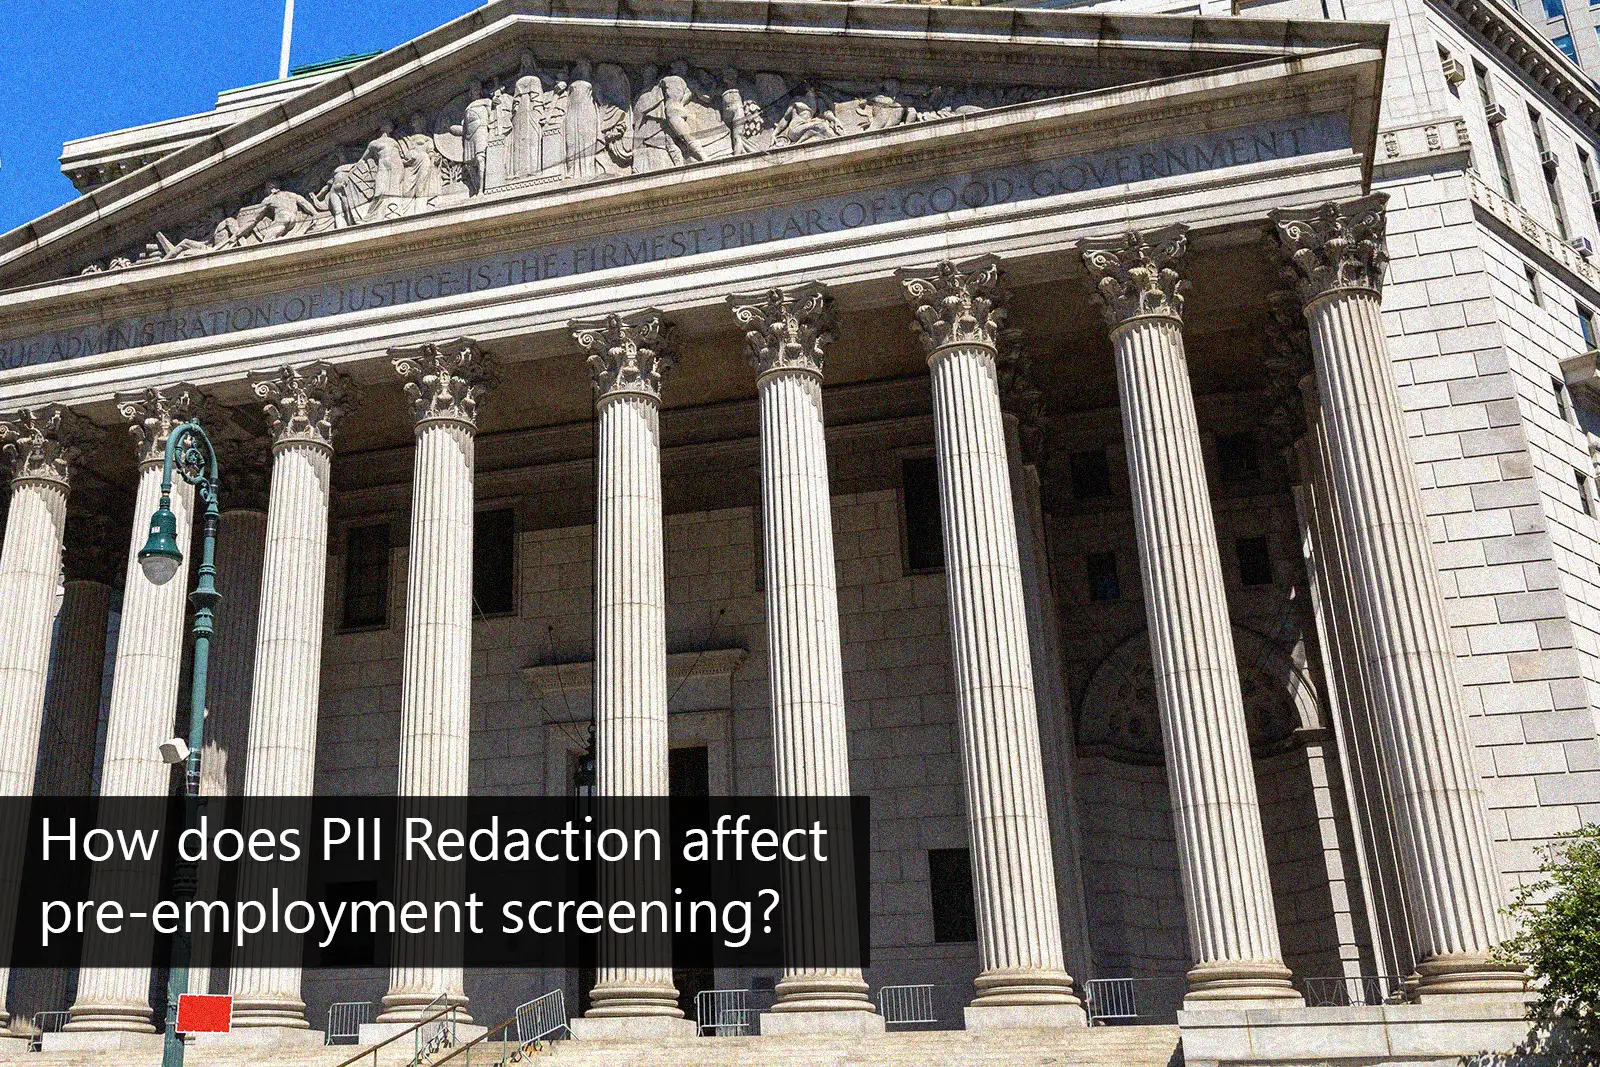 How does PII Redaction affect pre-employment screening?